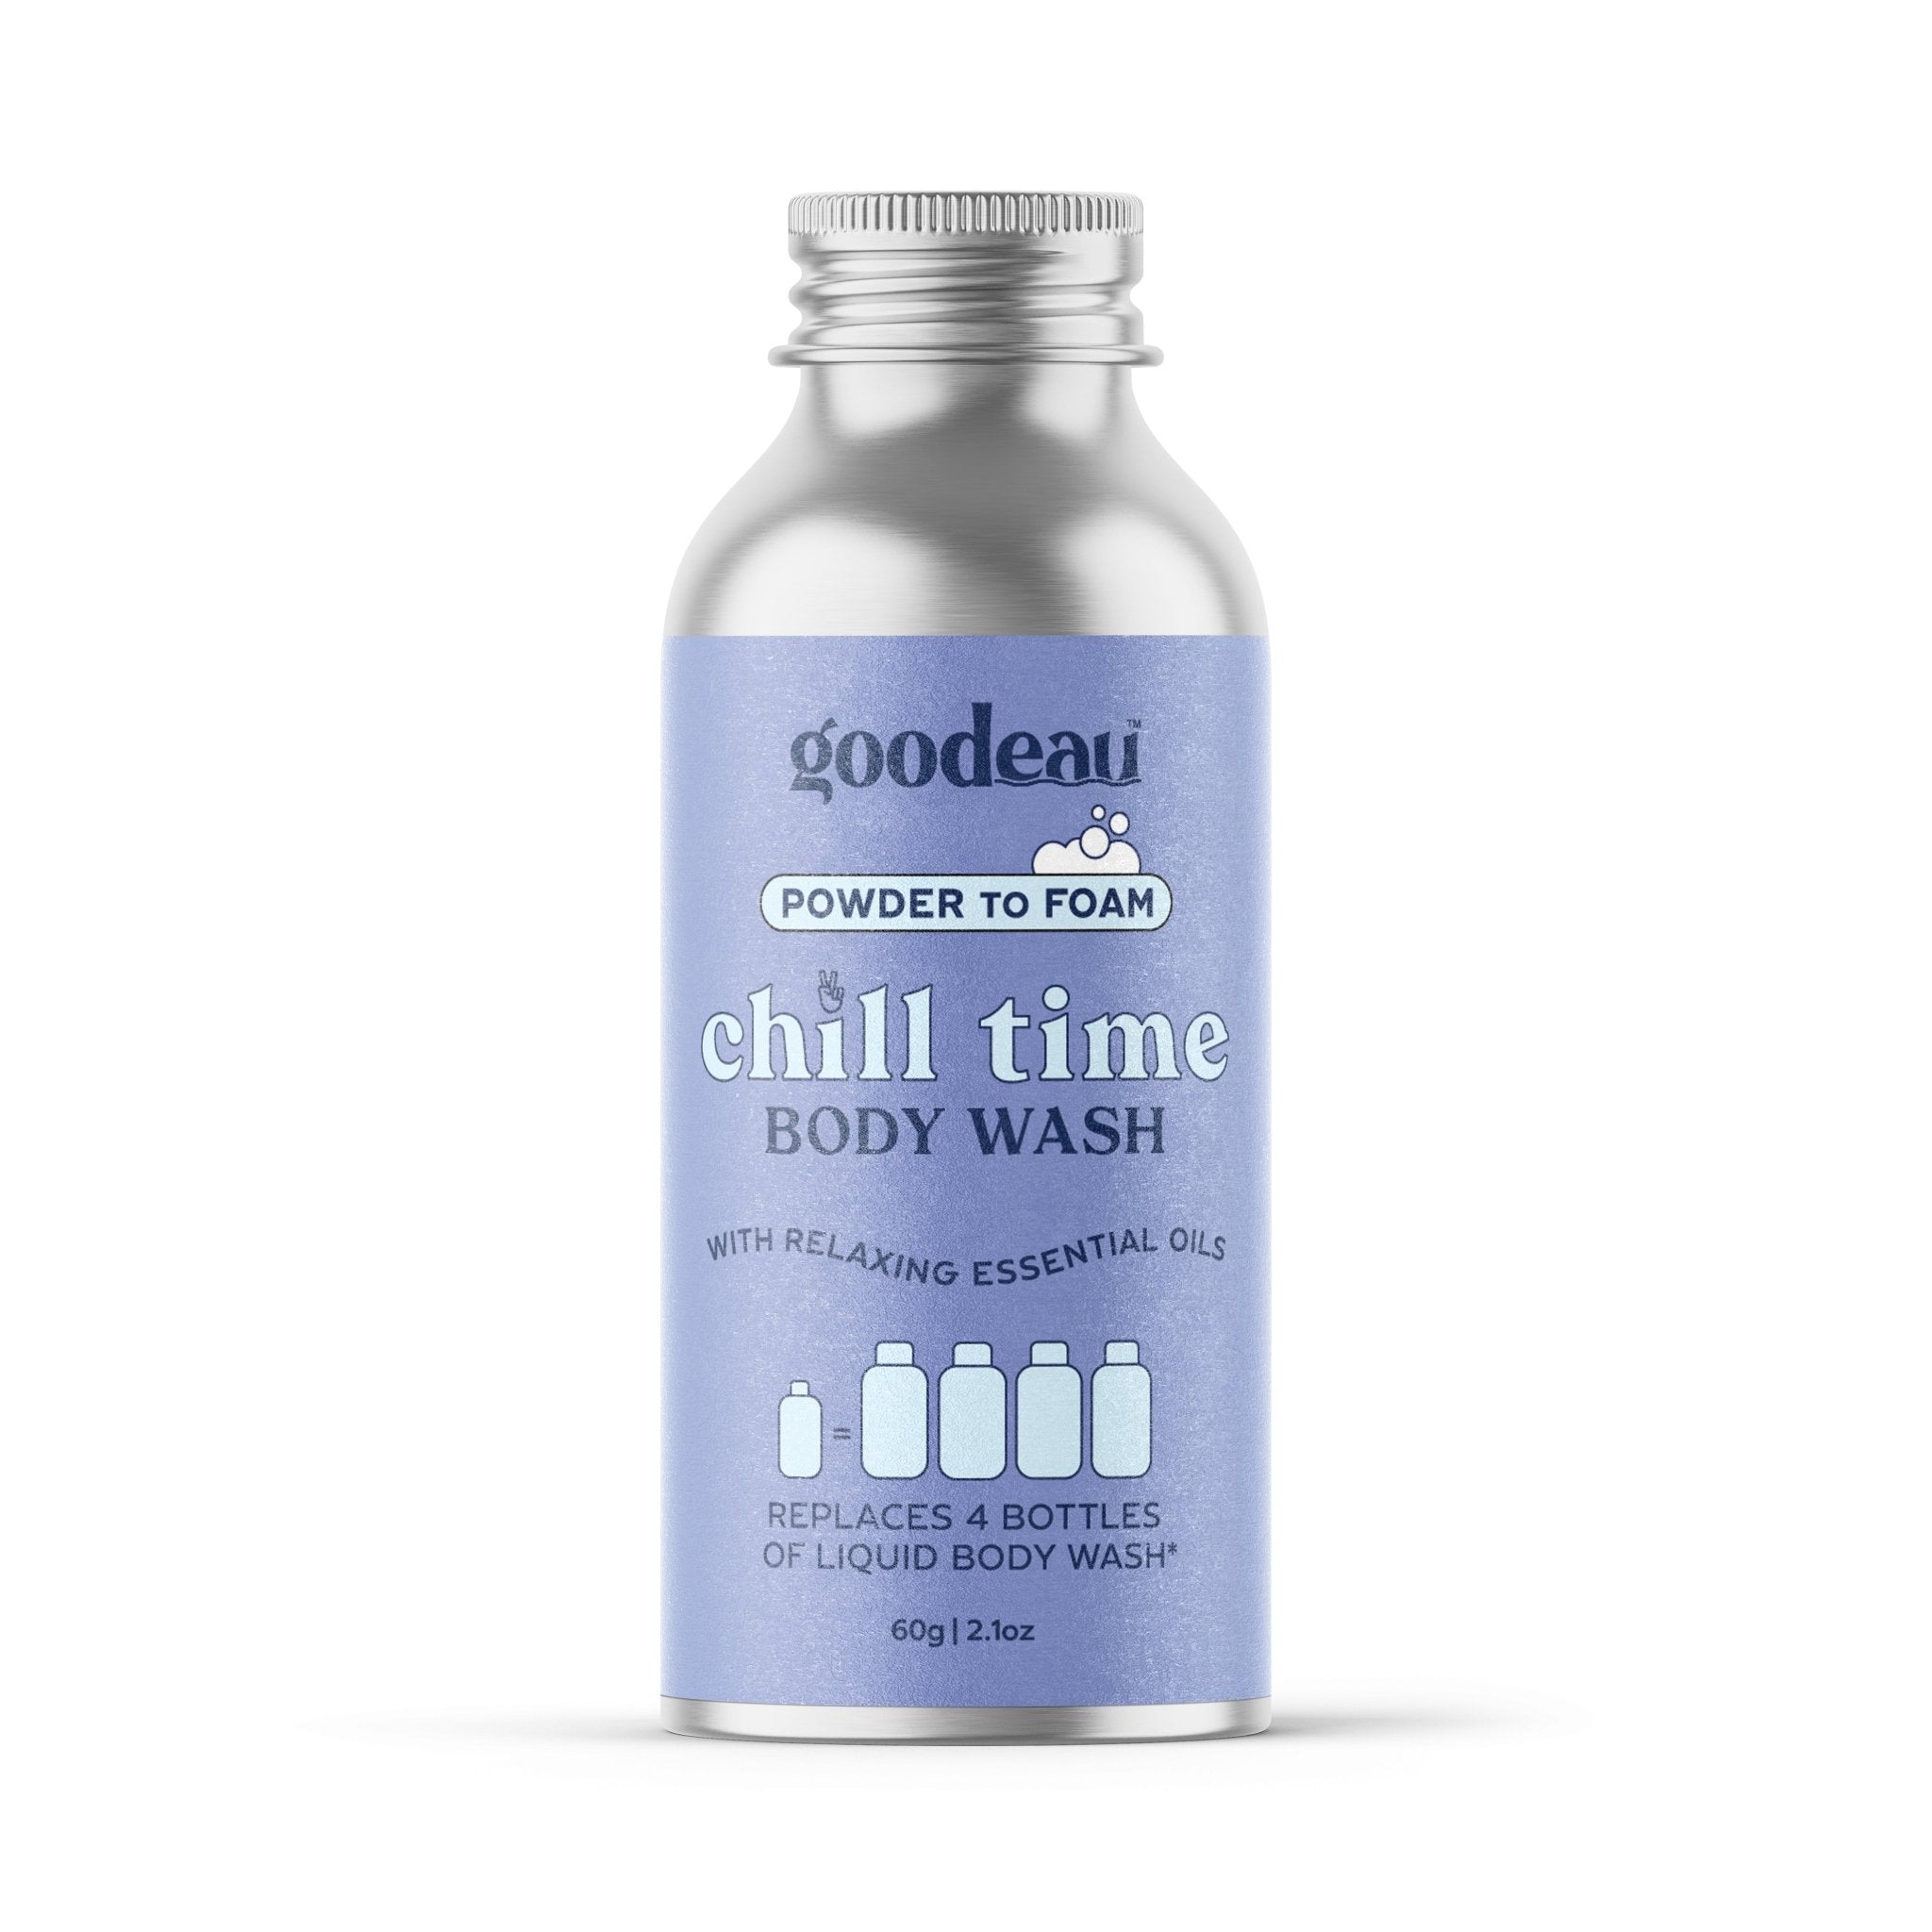 Chill Time Body Wash - Coming Soon - Goodeau